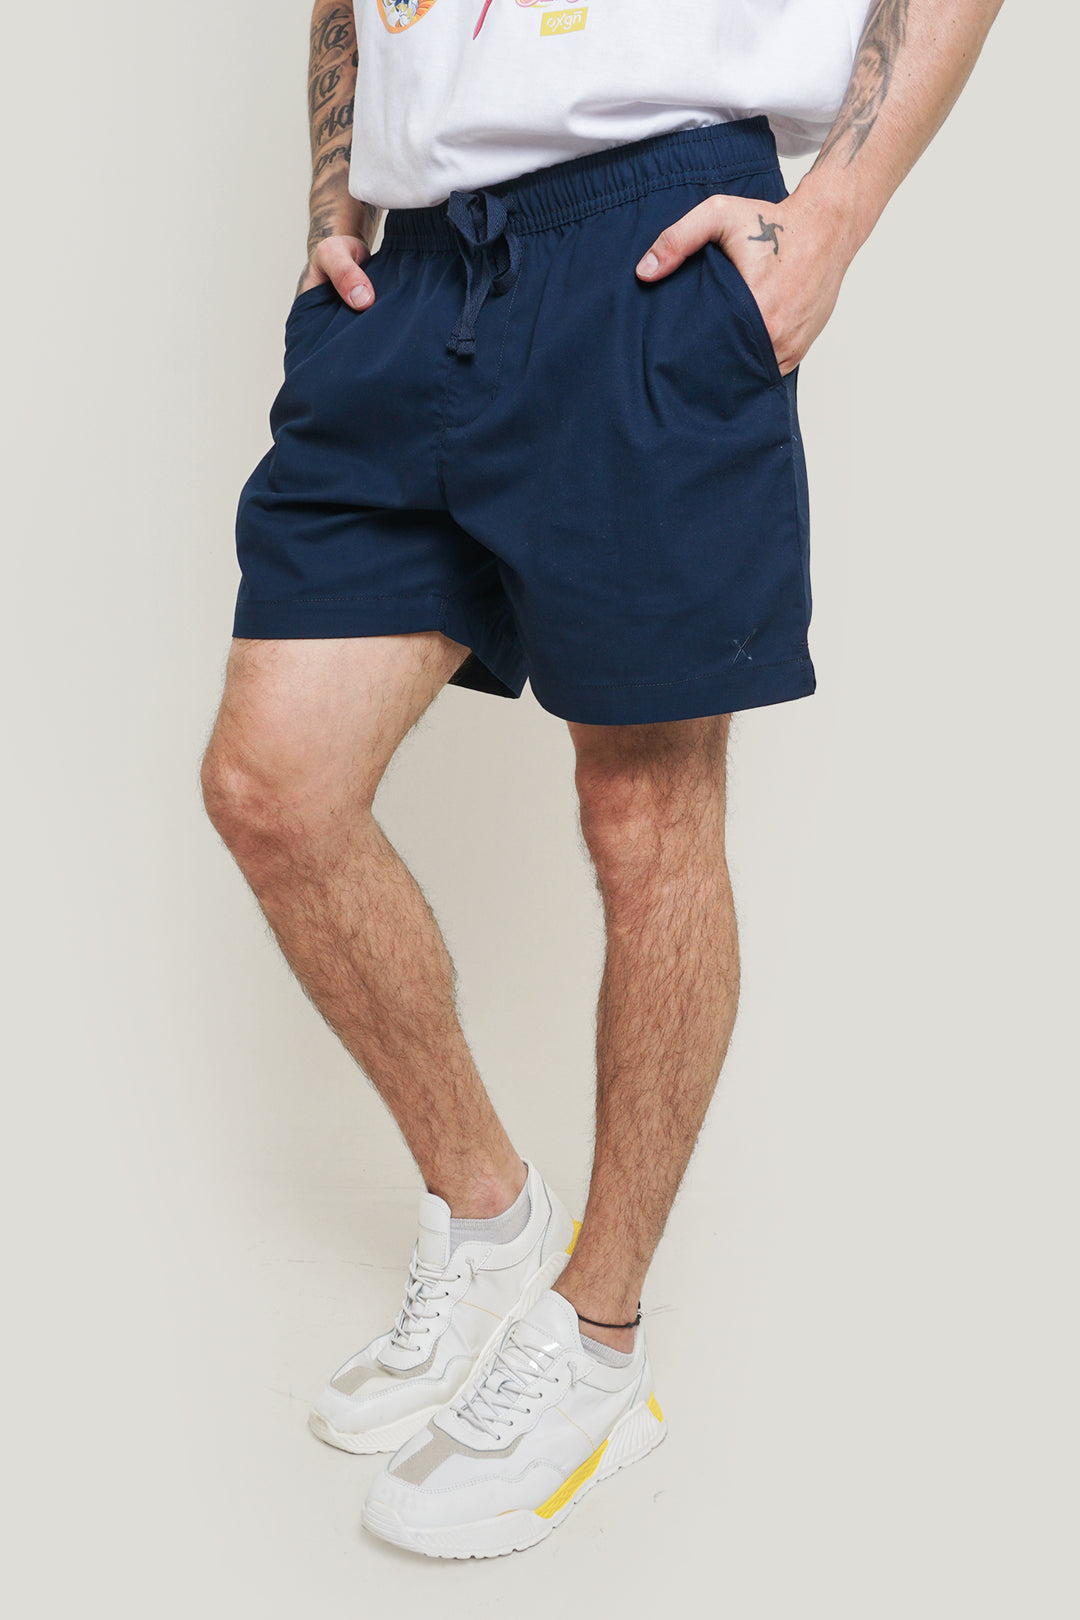 – Shorts Woven Embroidered OXGN